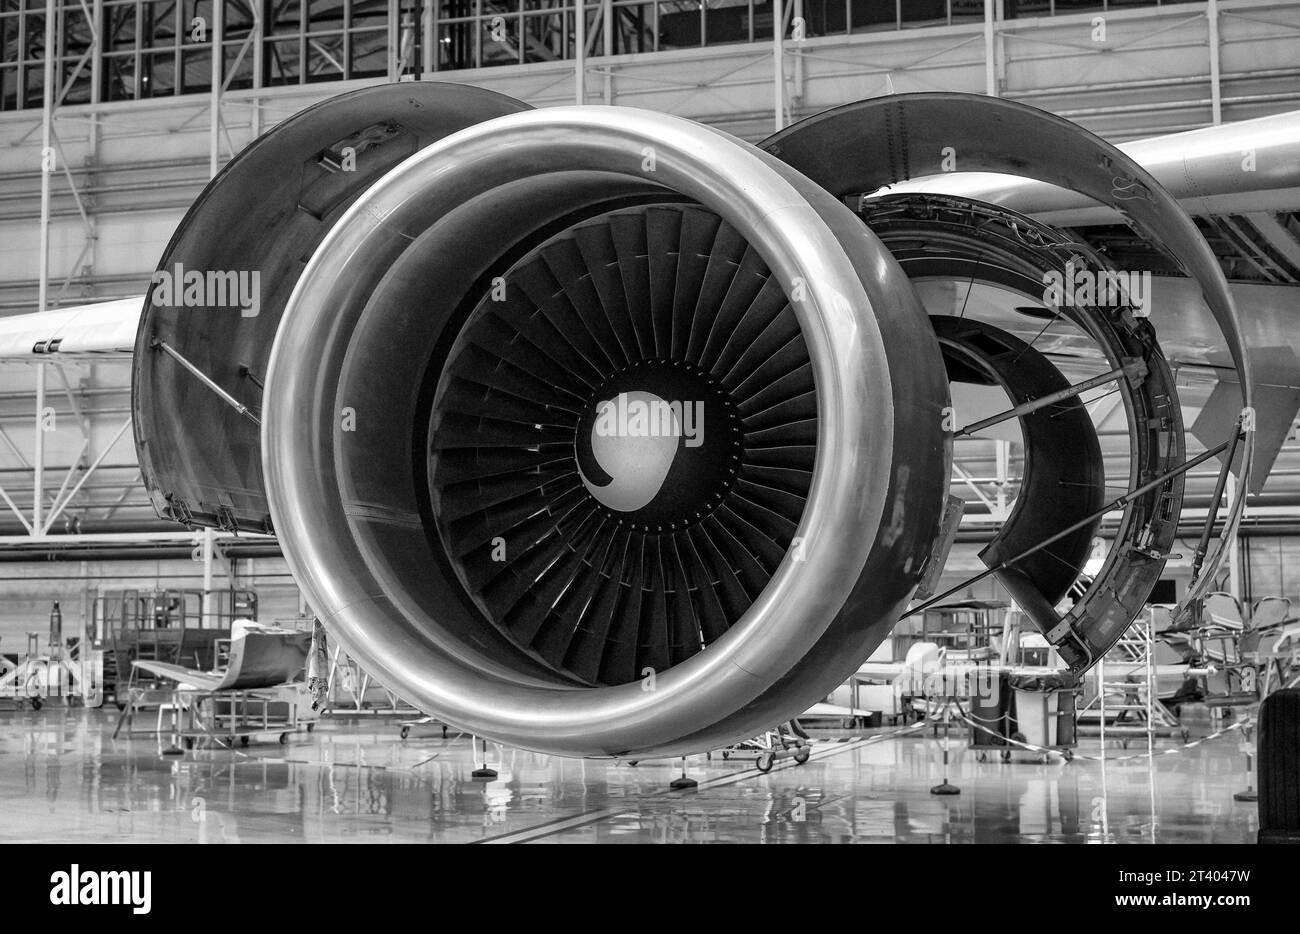 Close-up shot of an airplane's disassembled turbine in the hangar. Disassembly and repair are in progress. Black and white photo. Stock Photo